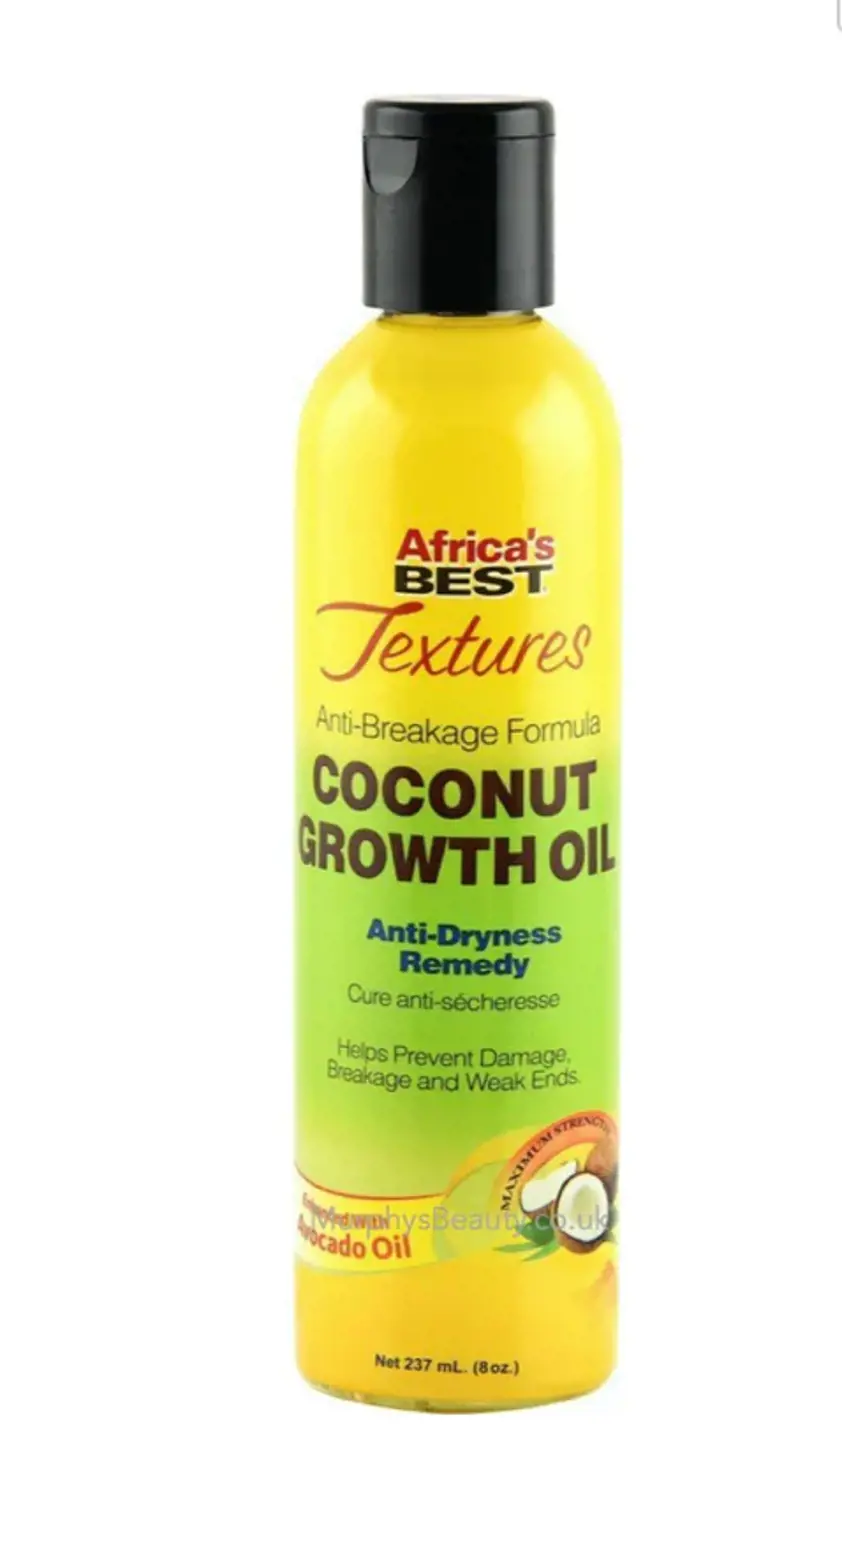 Africa's Best Textures Coconut Growth Oil